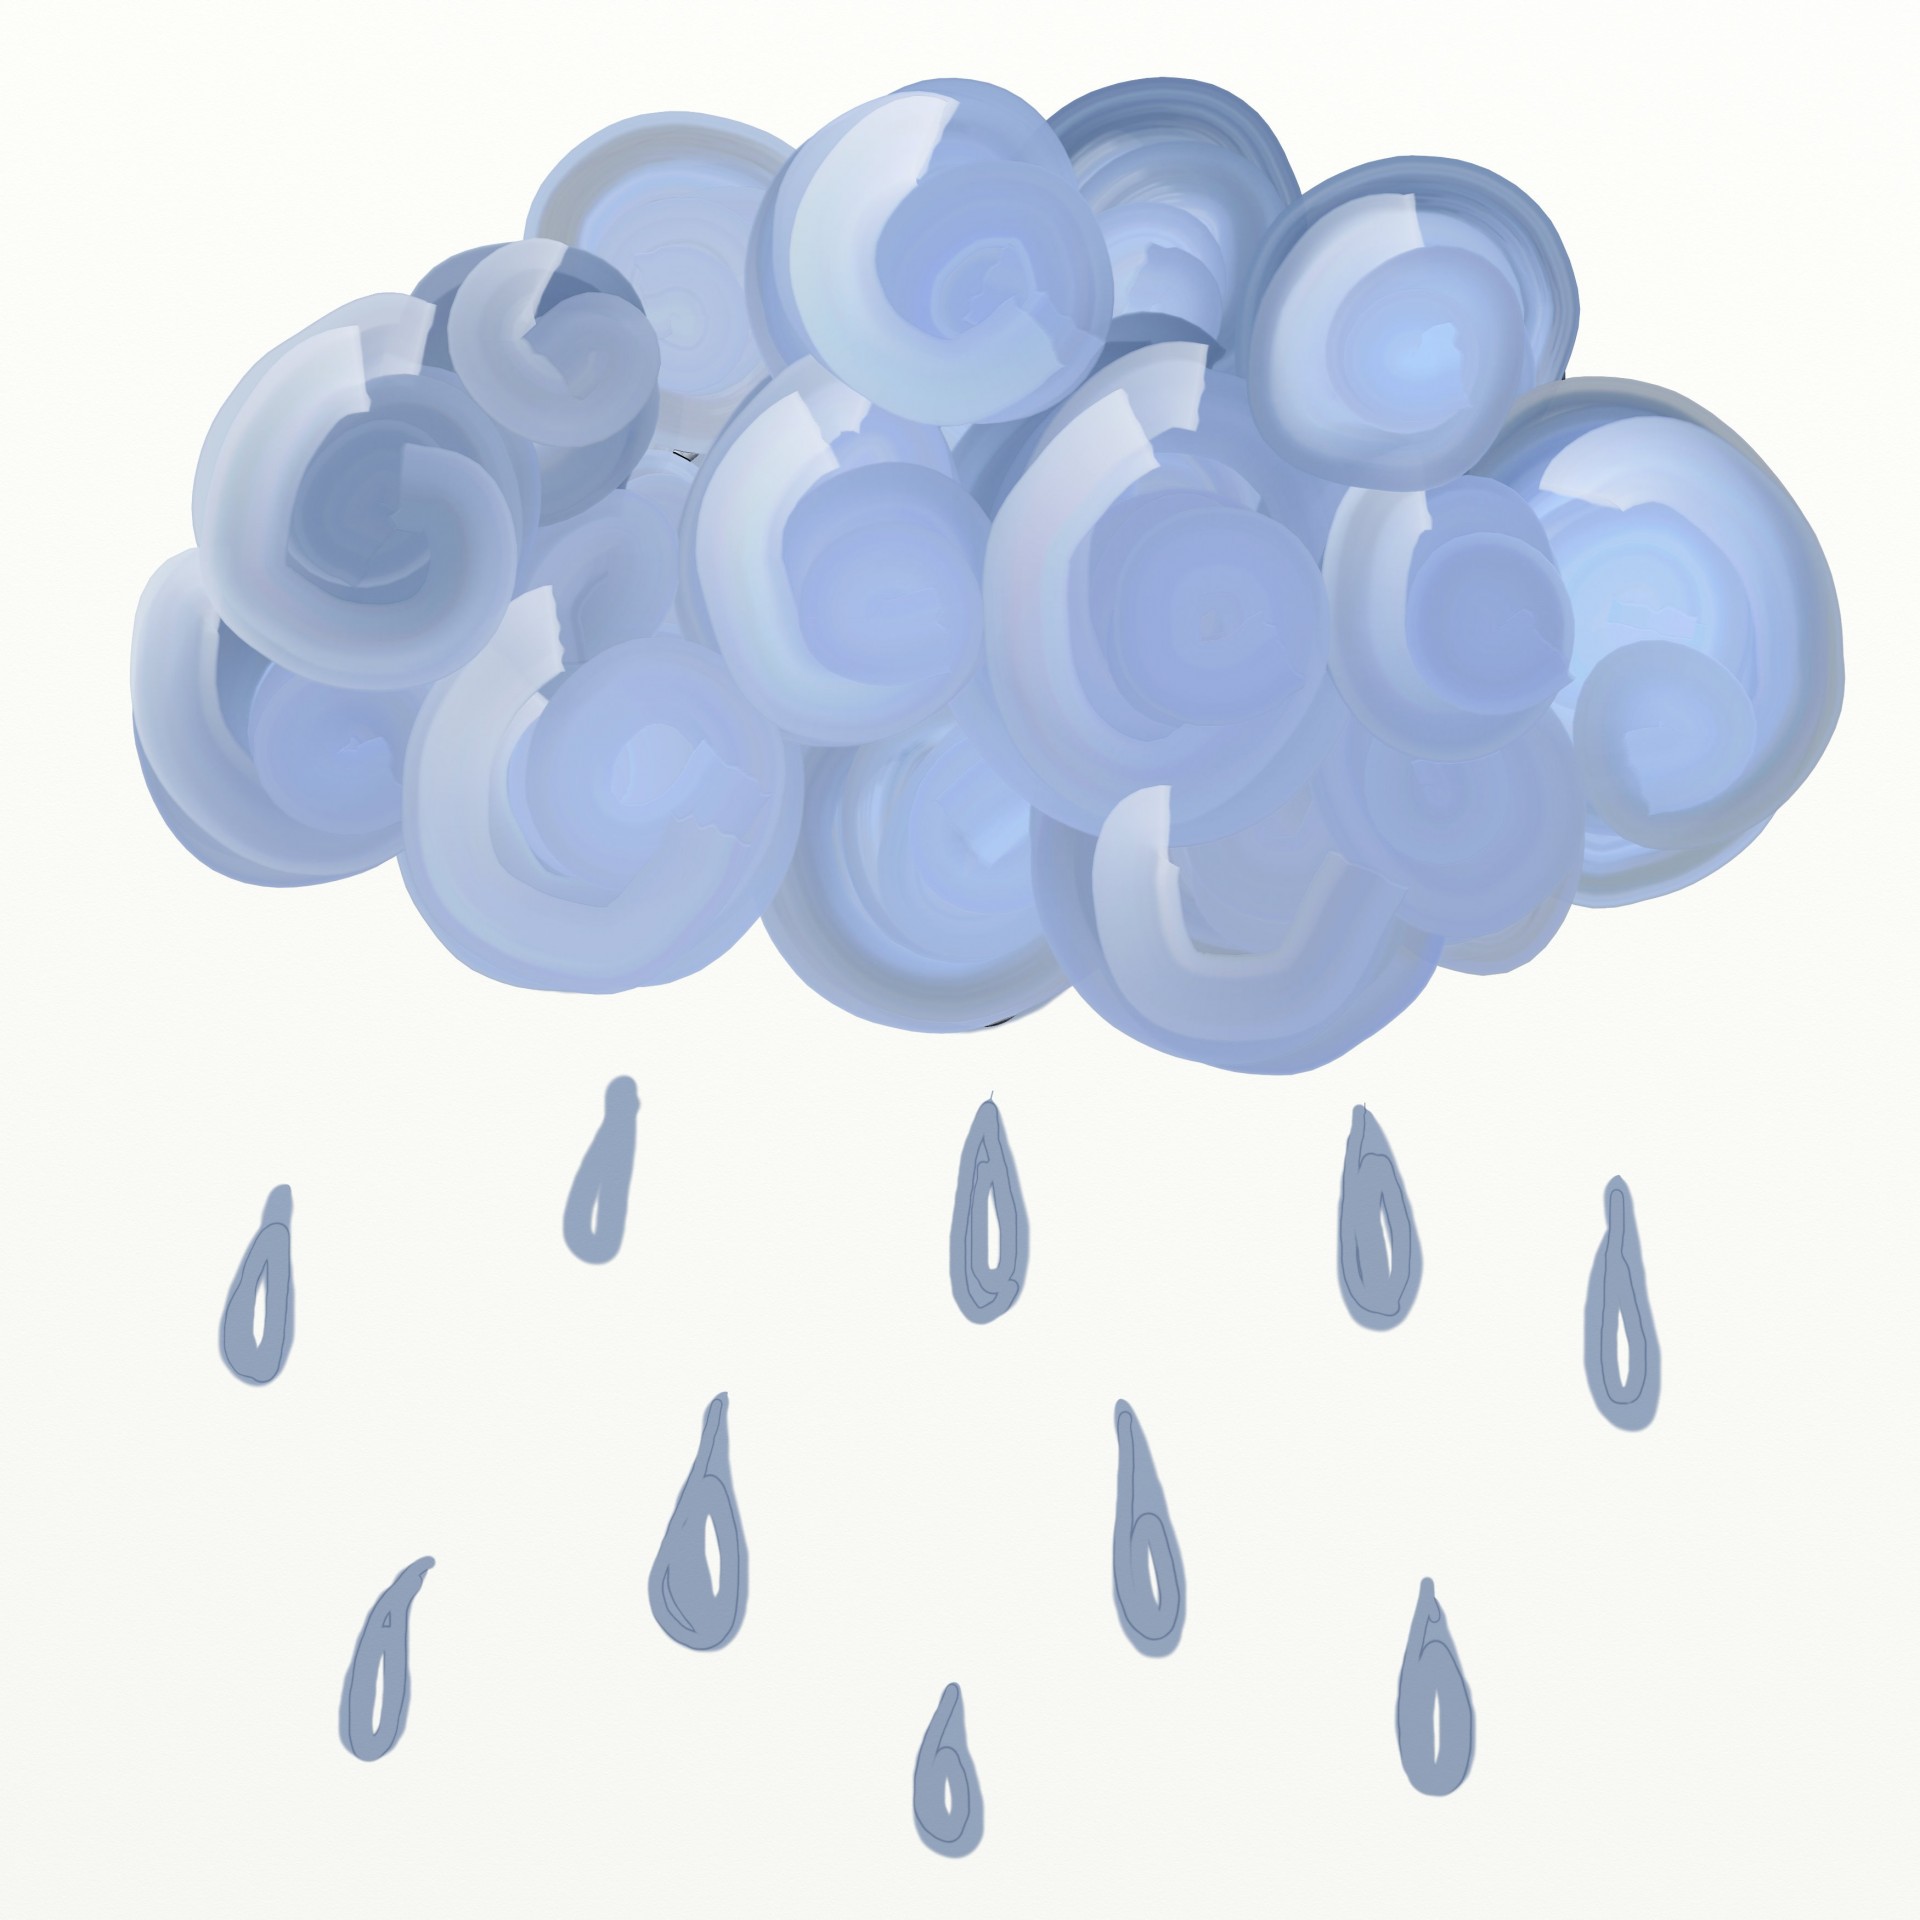 Rain cloud clipart free pictures - WikiClipArt